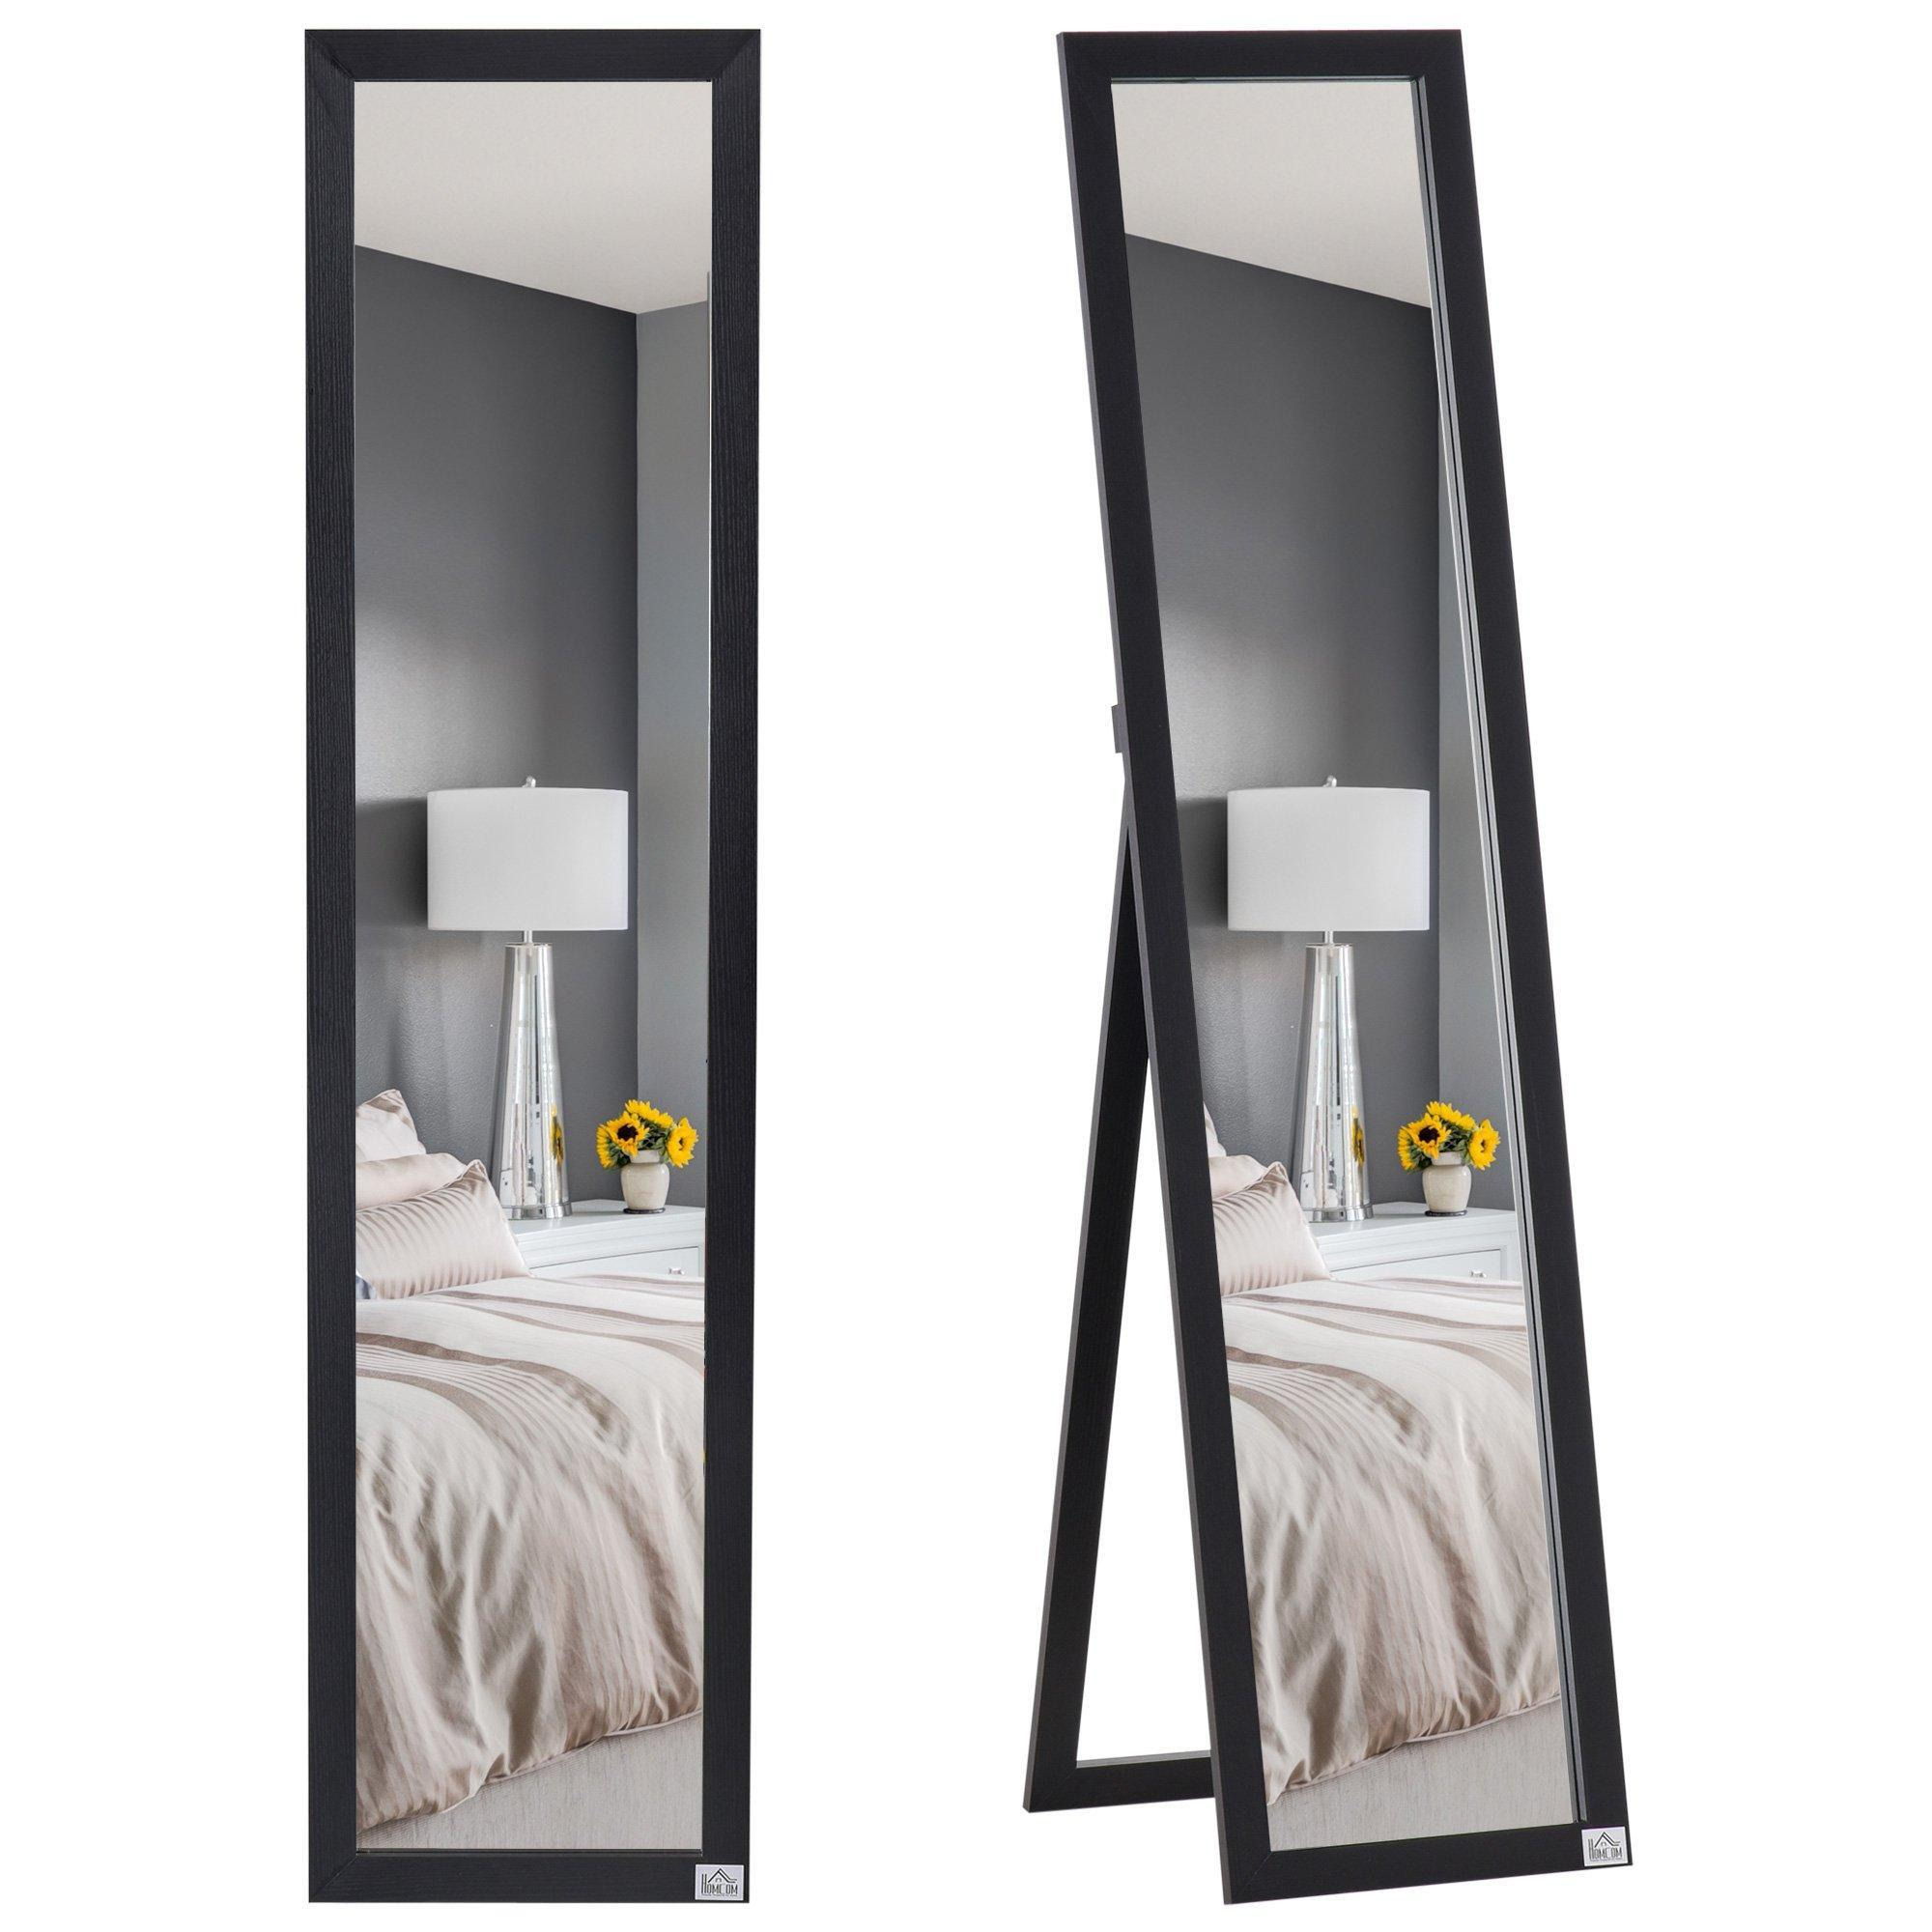 Full Length Mirror Free Standing or Wall-Mounted Tall Mirror Black - image 1